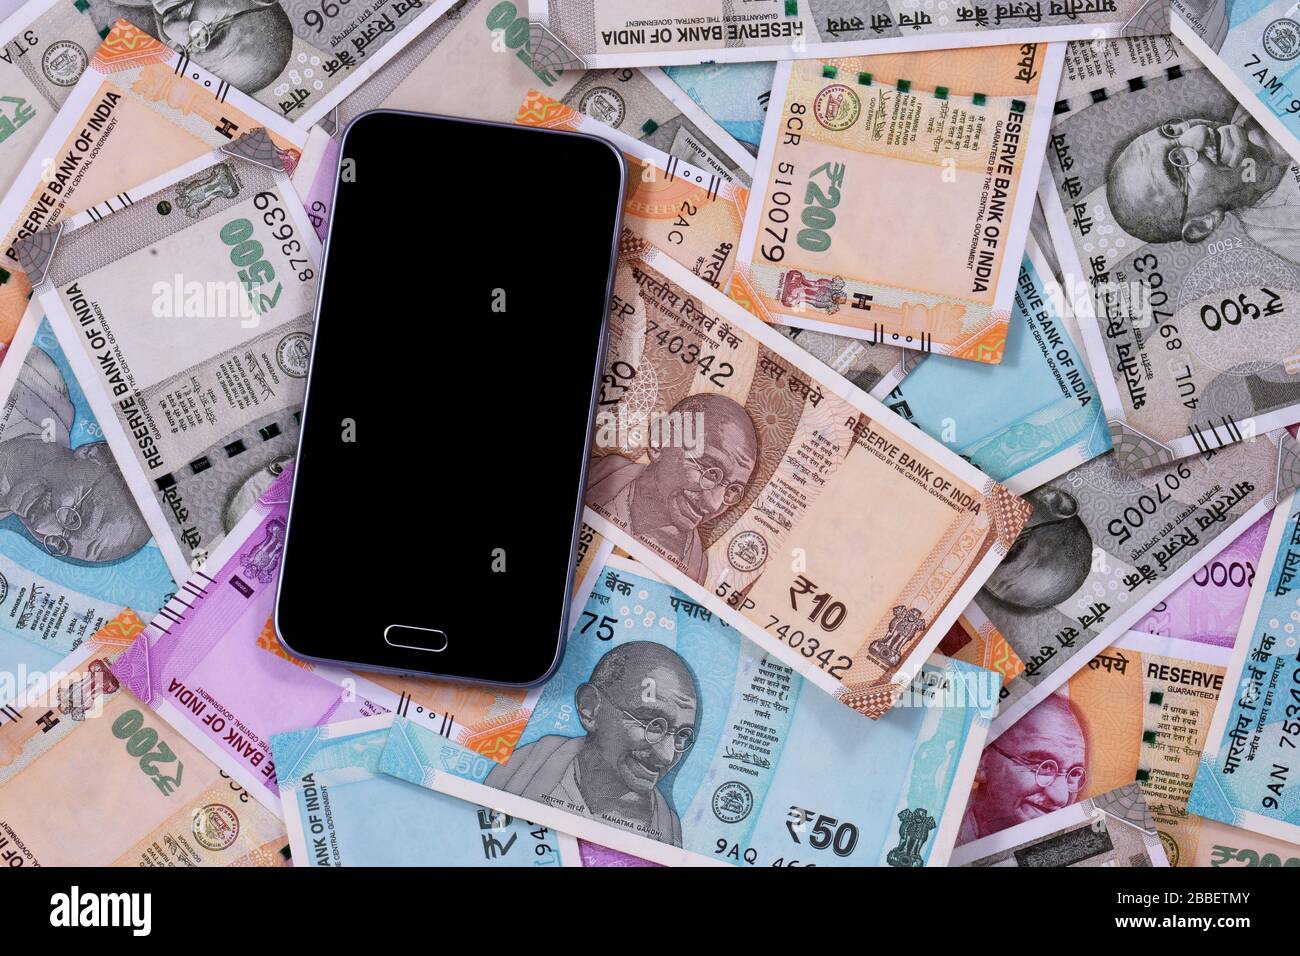 Mobile smart phone and indian rupee notes, digital money,fin-tech,money making online concepts. Stock Photo